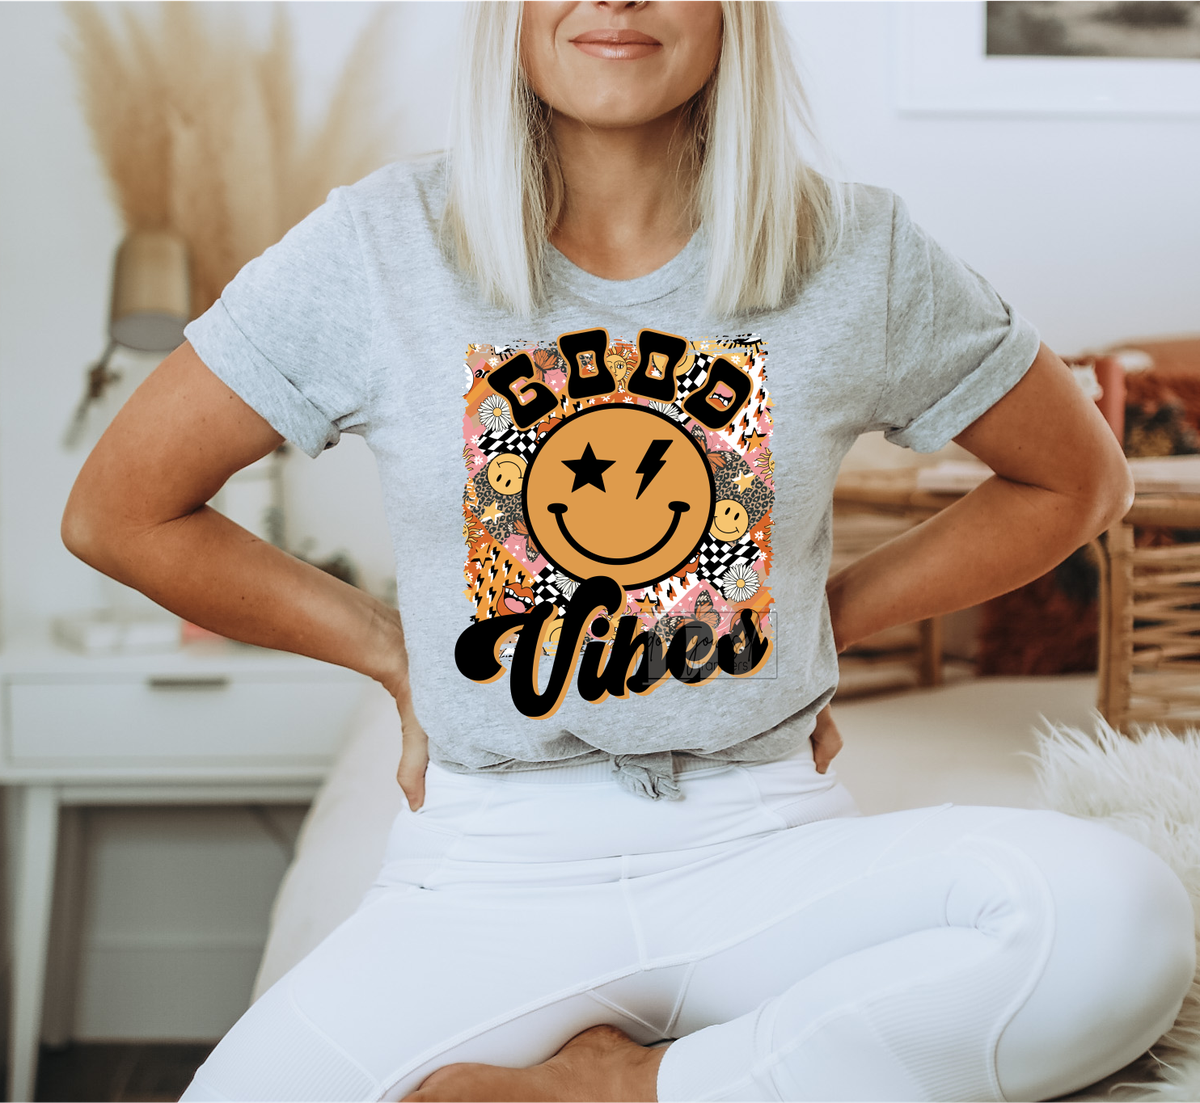 RTSGood Vibes Frame Smiley face Yellow  size ADULT 9.6x11.6 DTF TRANSFERPRINT TO ORDER